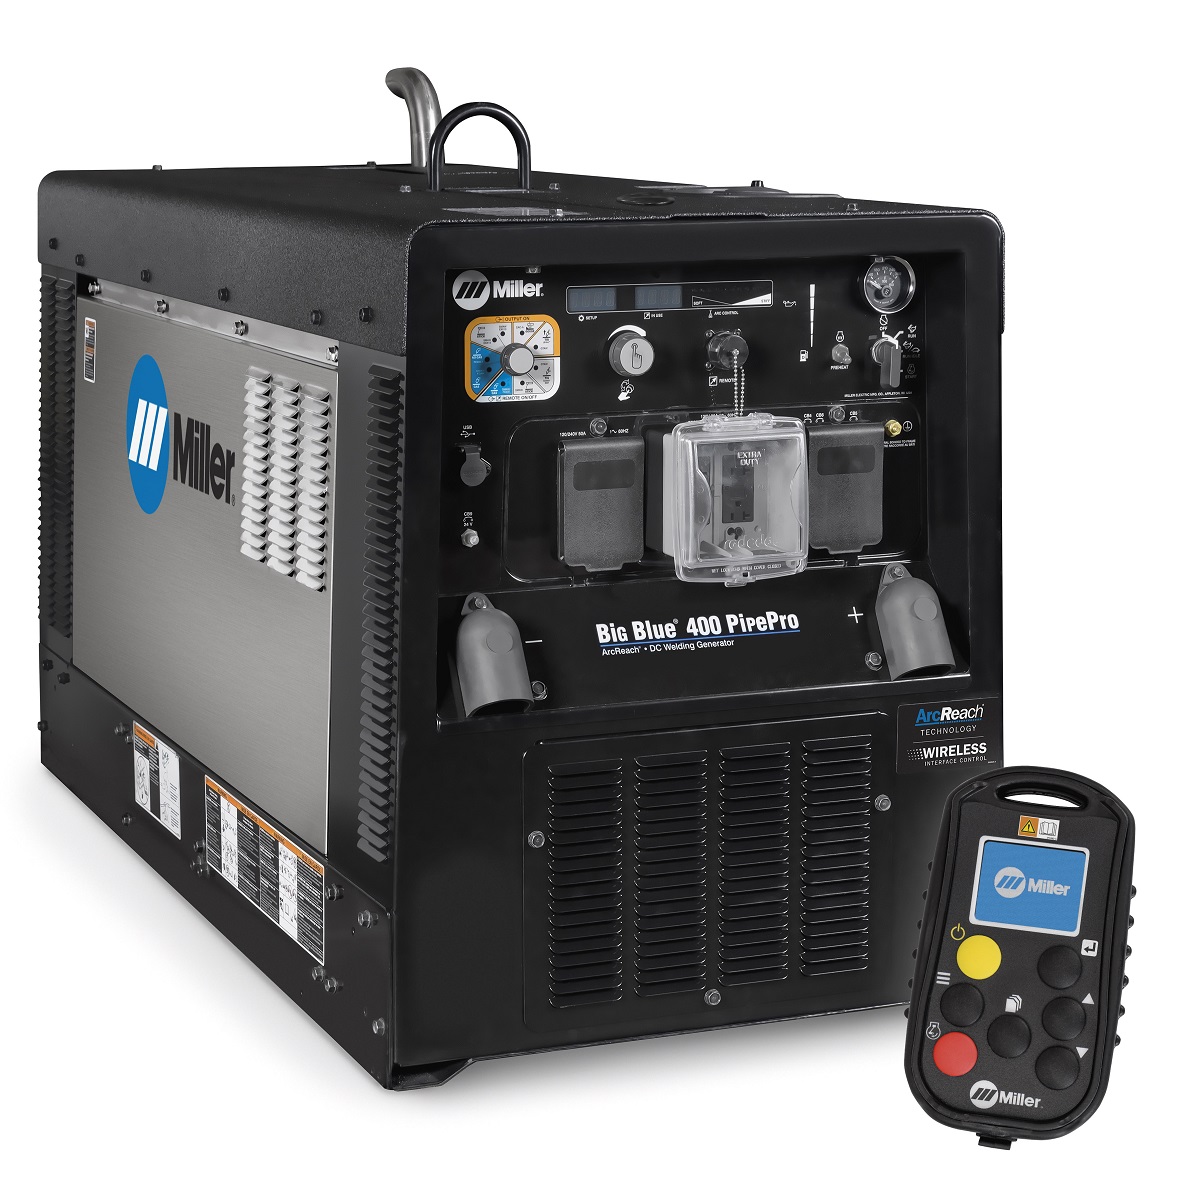 Frontier 400X welder from Lincoln Electric offers numerous optimized weld  modes